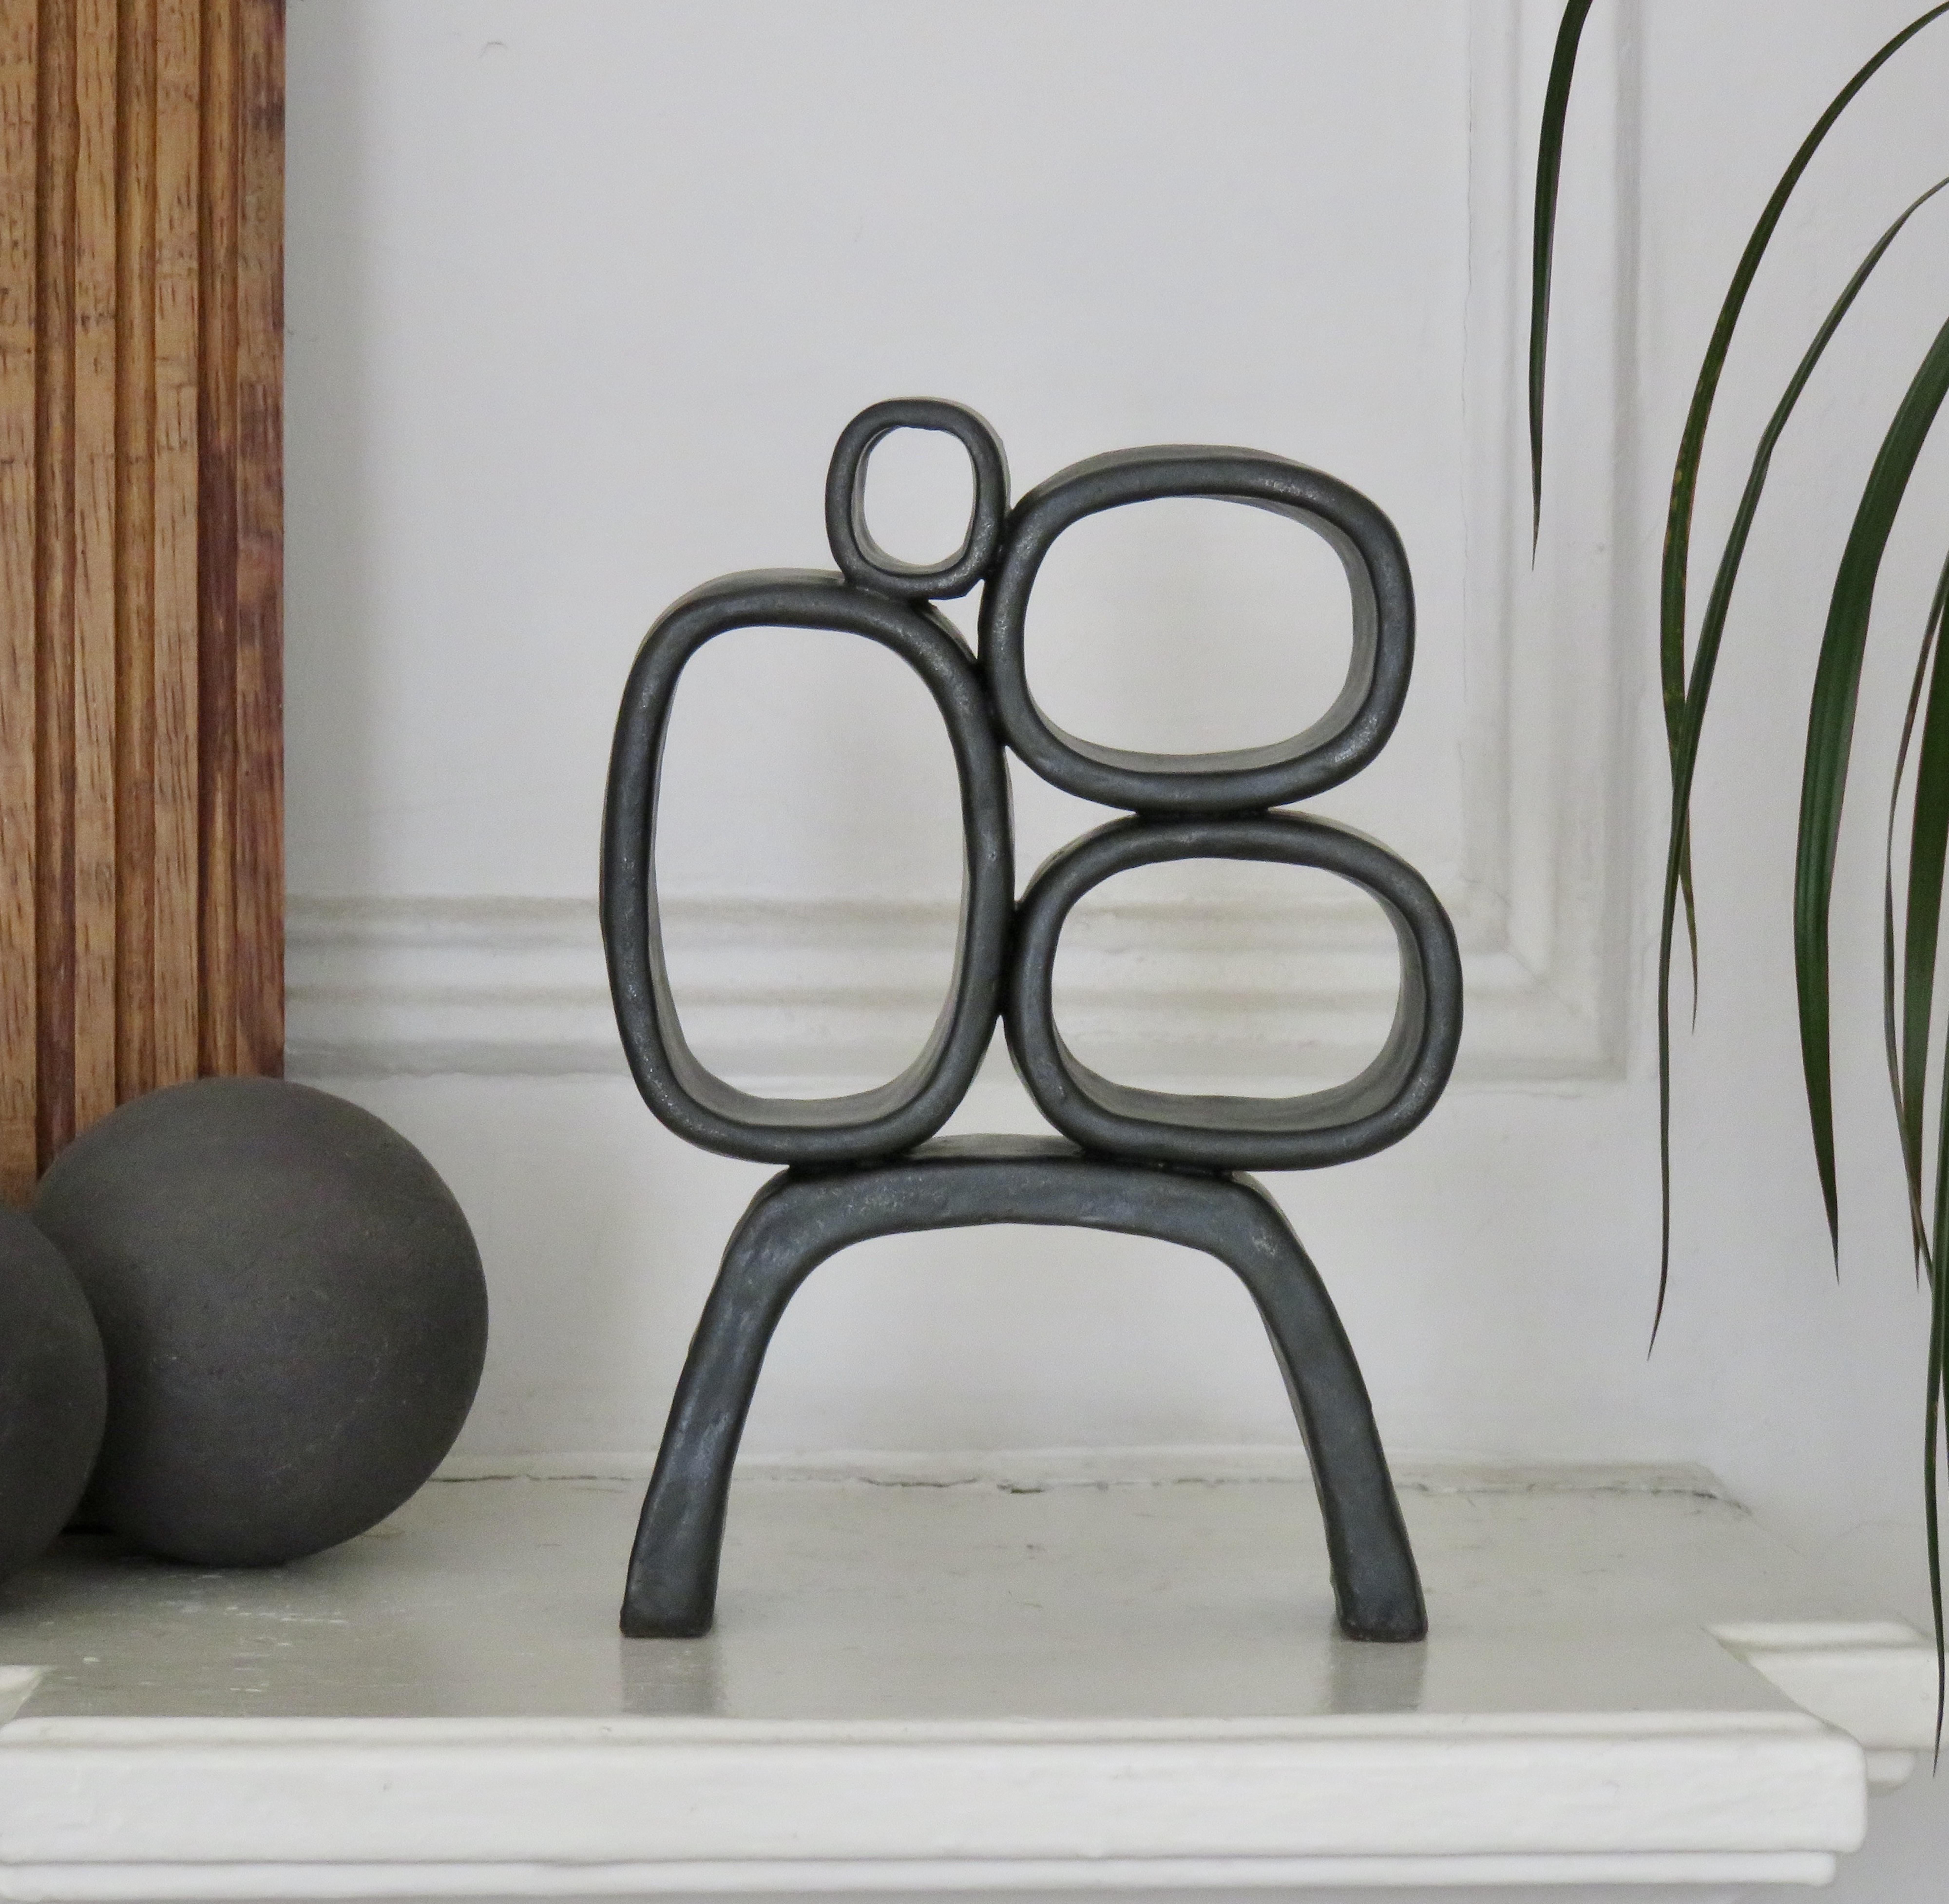 Metallic Black Hand-Built Ceramic Sculpture with Hollow Rings on Angled Legs 11